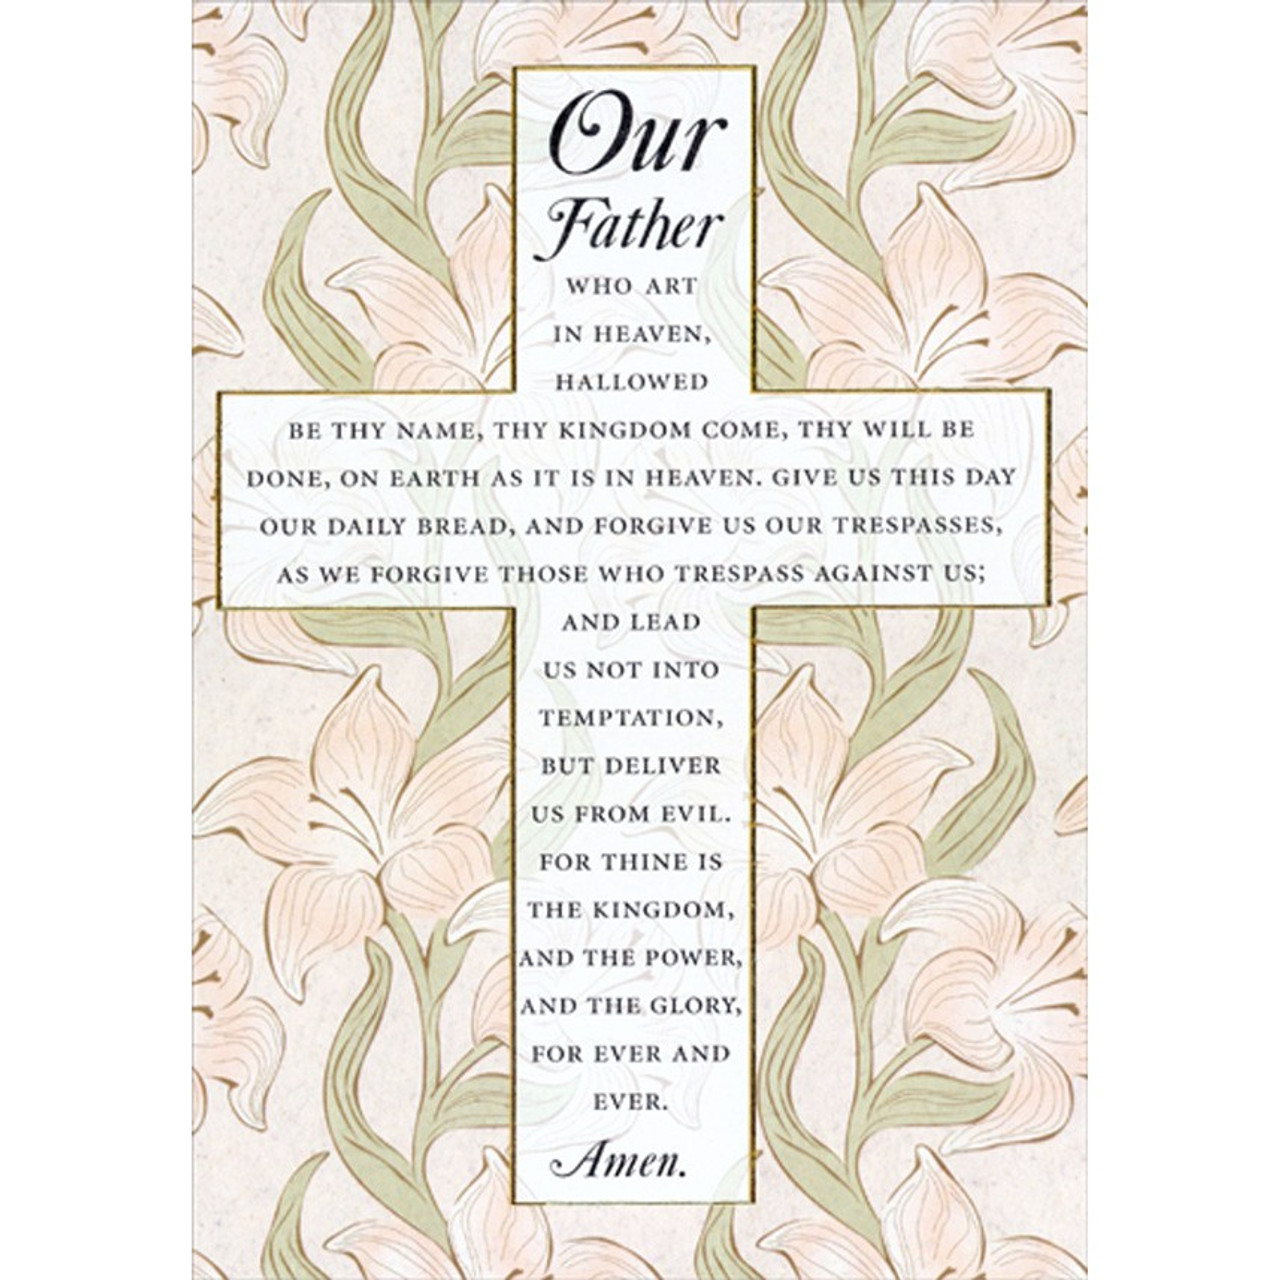 Our Father, who art in heaven, hallowed be thy name. Thy Kingdom come, thy  will be done, on …